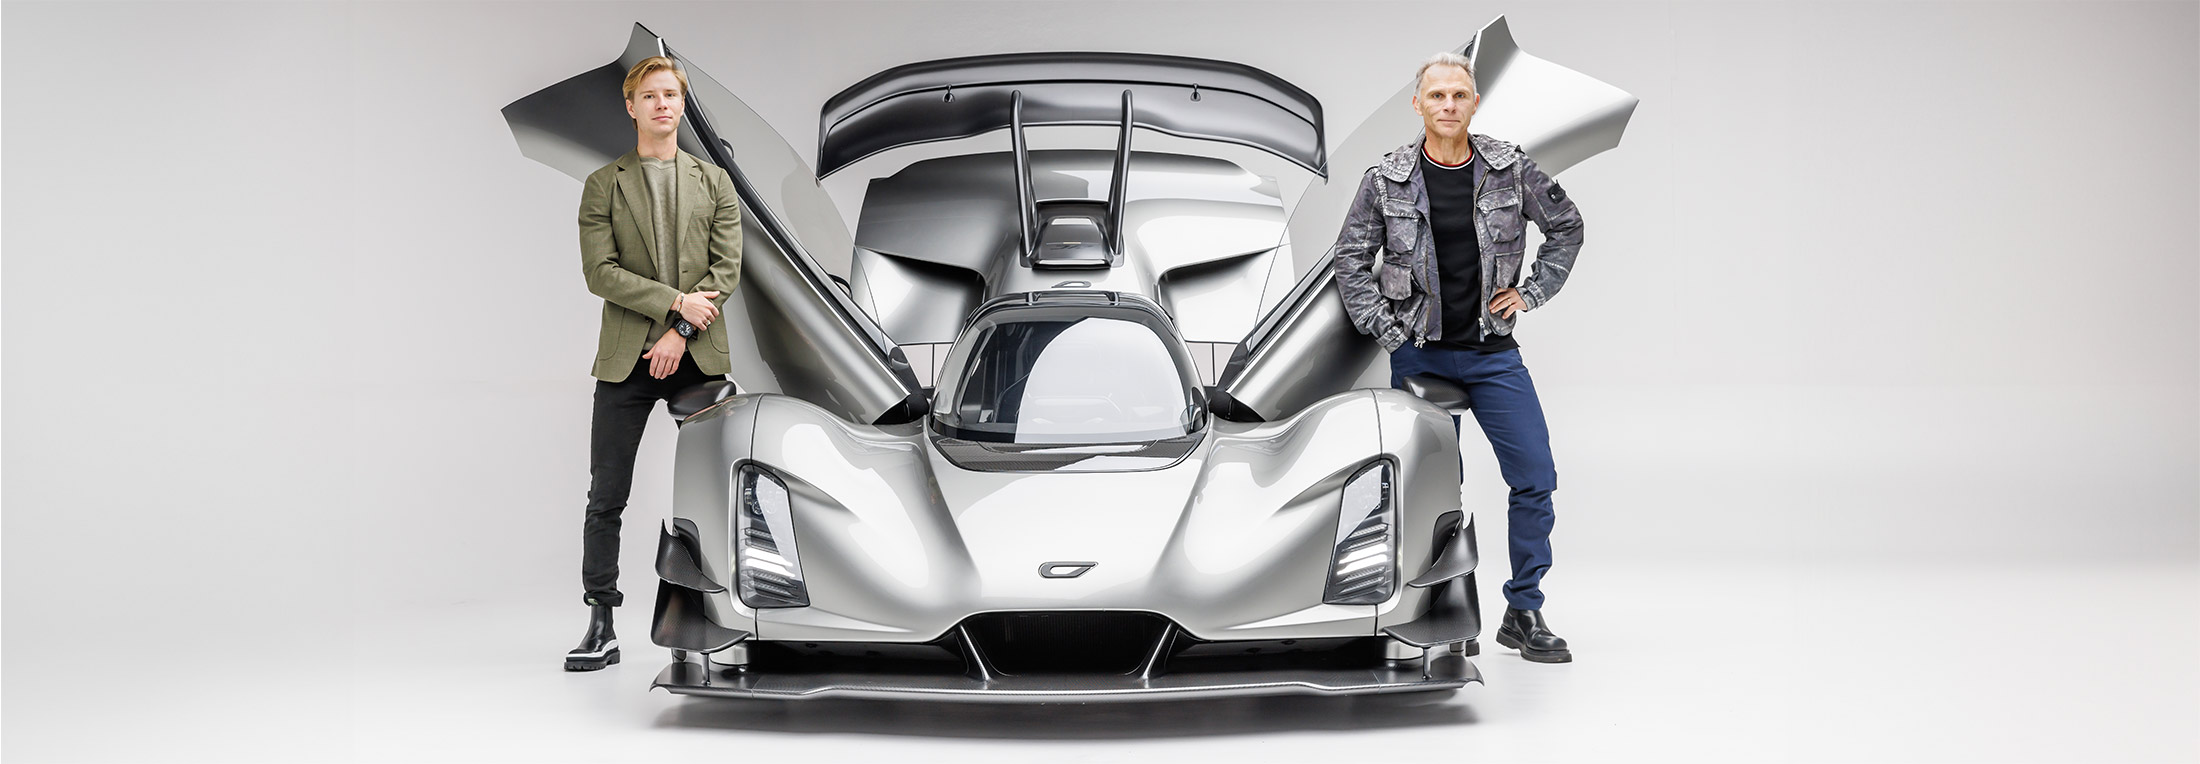 lukas and kevin czinger standing with their Czinger 21C hypercar